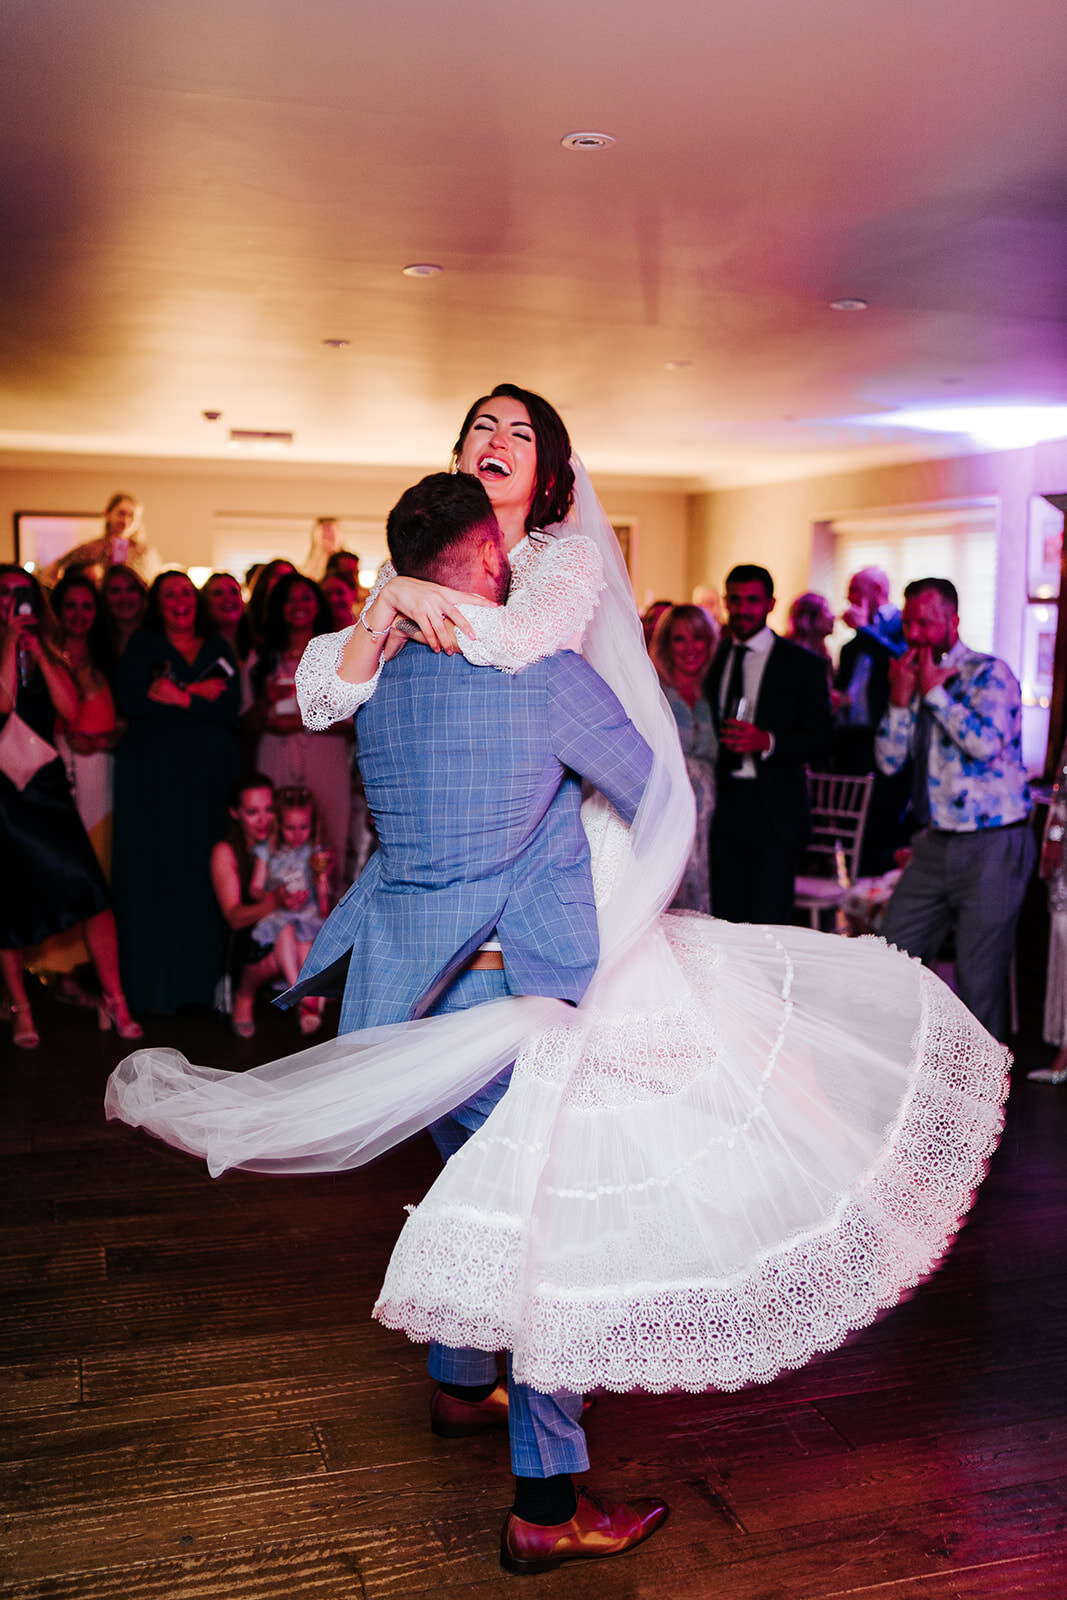 Groom picks up bride and swirls her around during first dance at Cotswolds wedding. Bride's dress trails along beautifully as groom turns her.